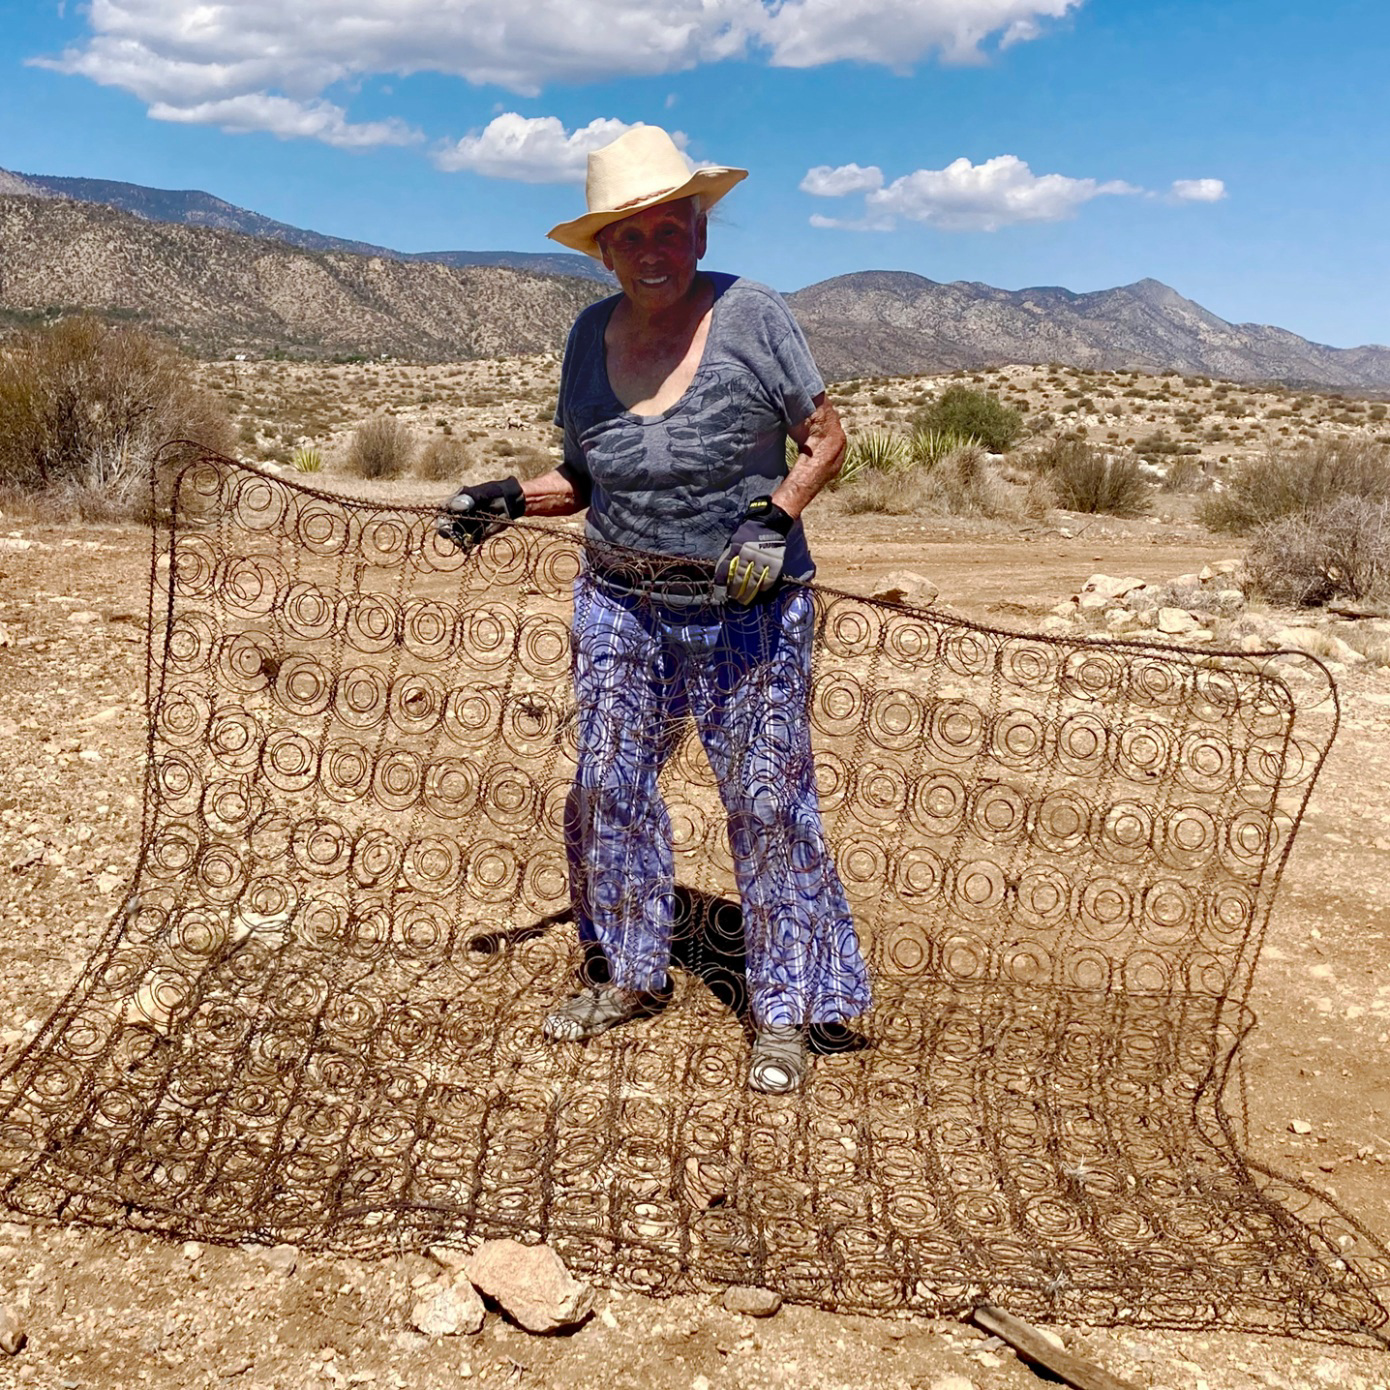 A woman holding a wired fence.